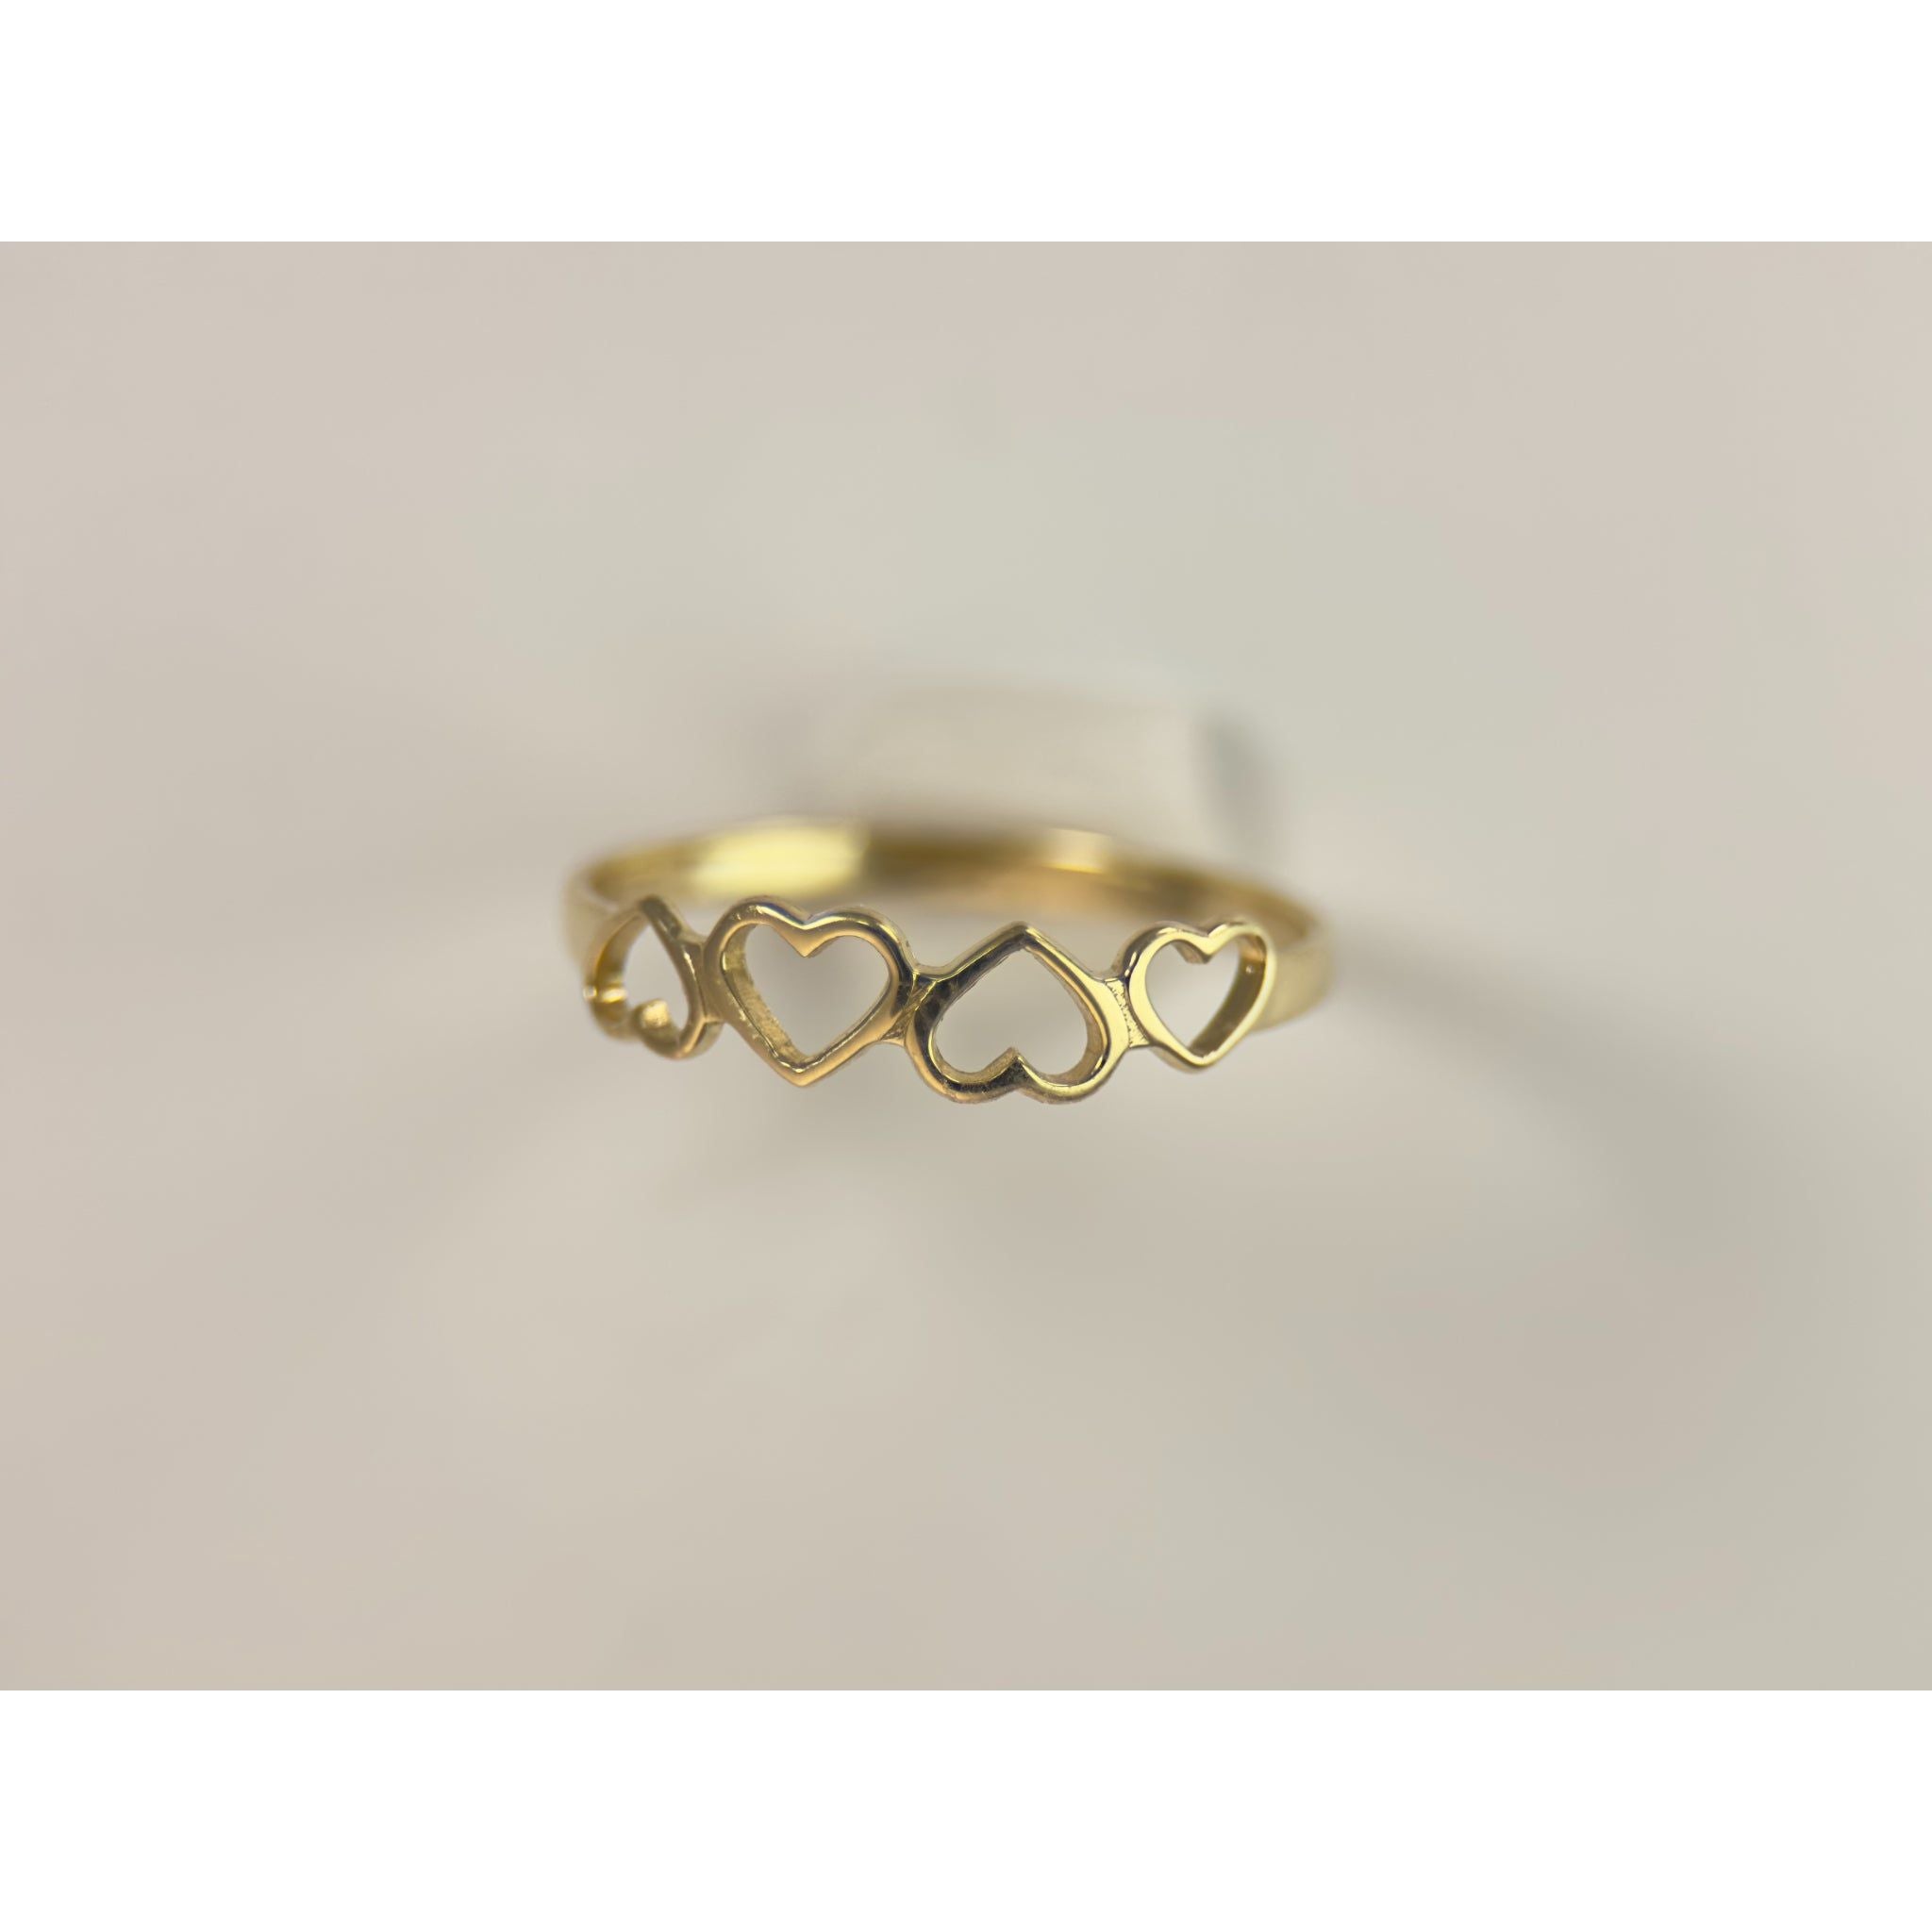 DR2014 - 14K Yellow Gold - Ladies Gold Rings - 3 Hearts